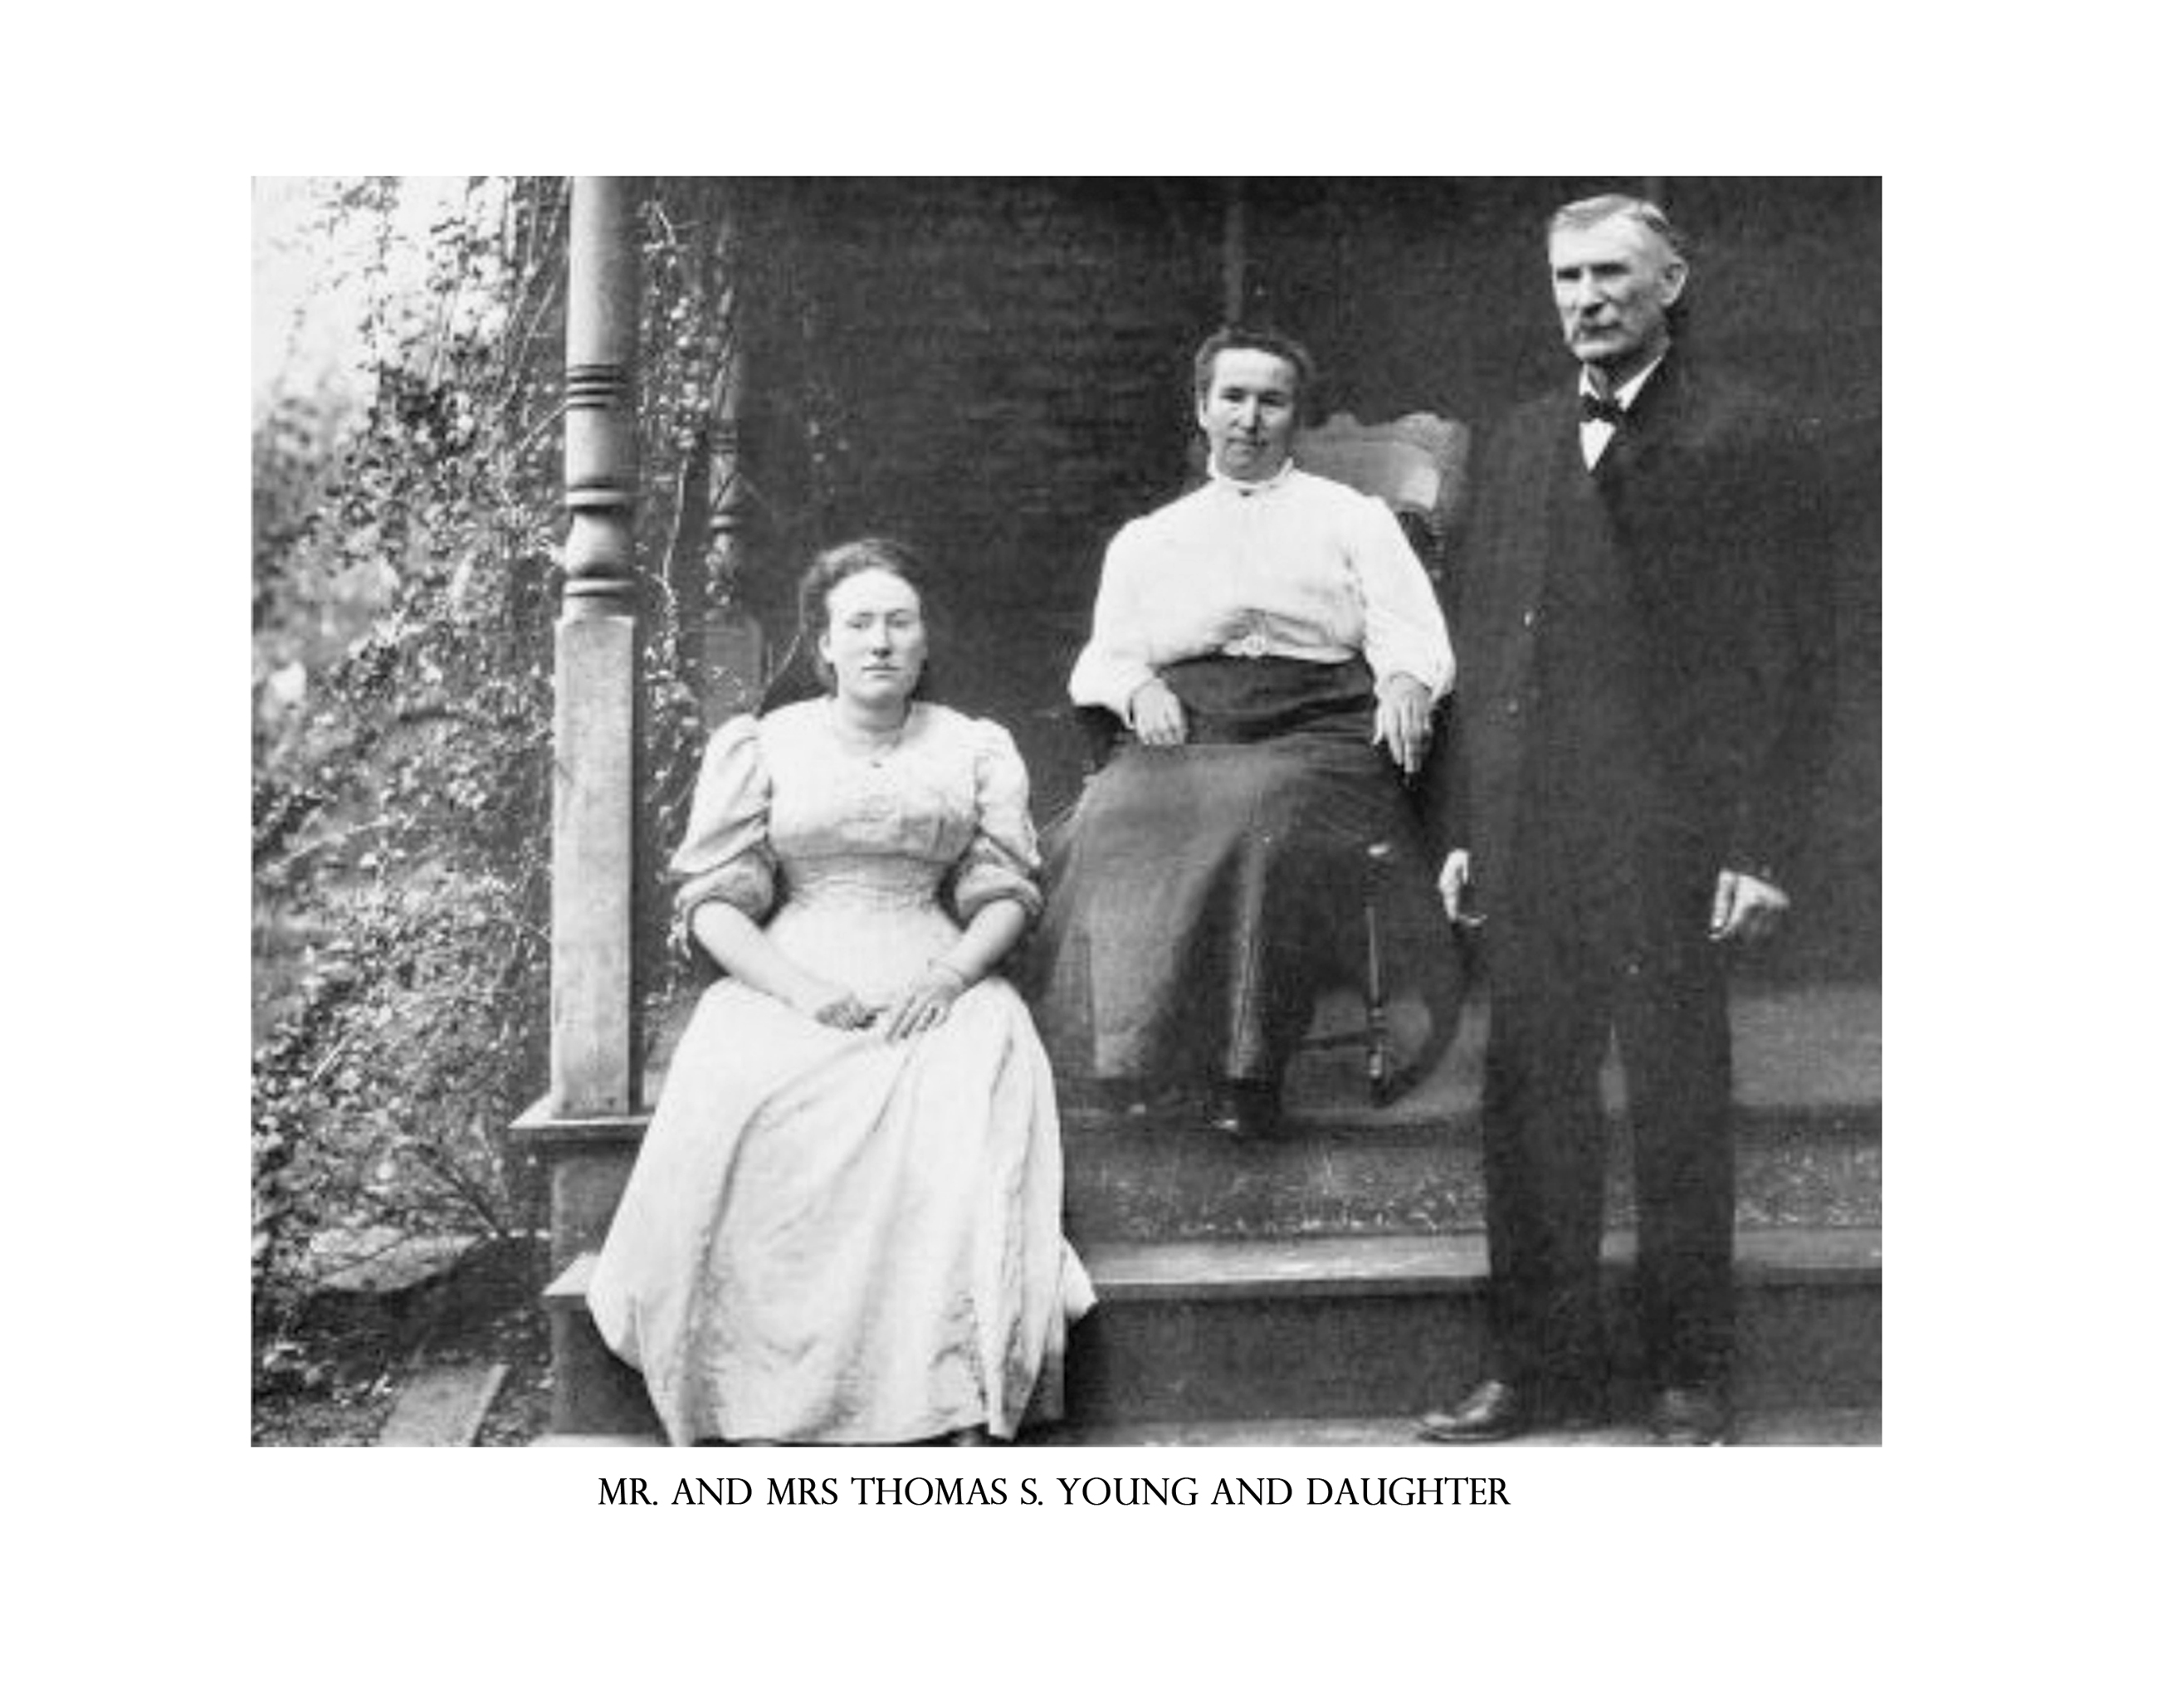 Thomas S. Young, James Young, and William Young in the History of Lawrence County